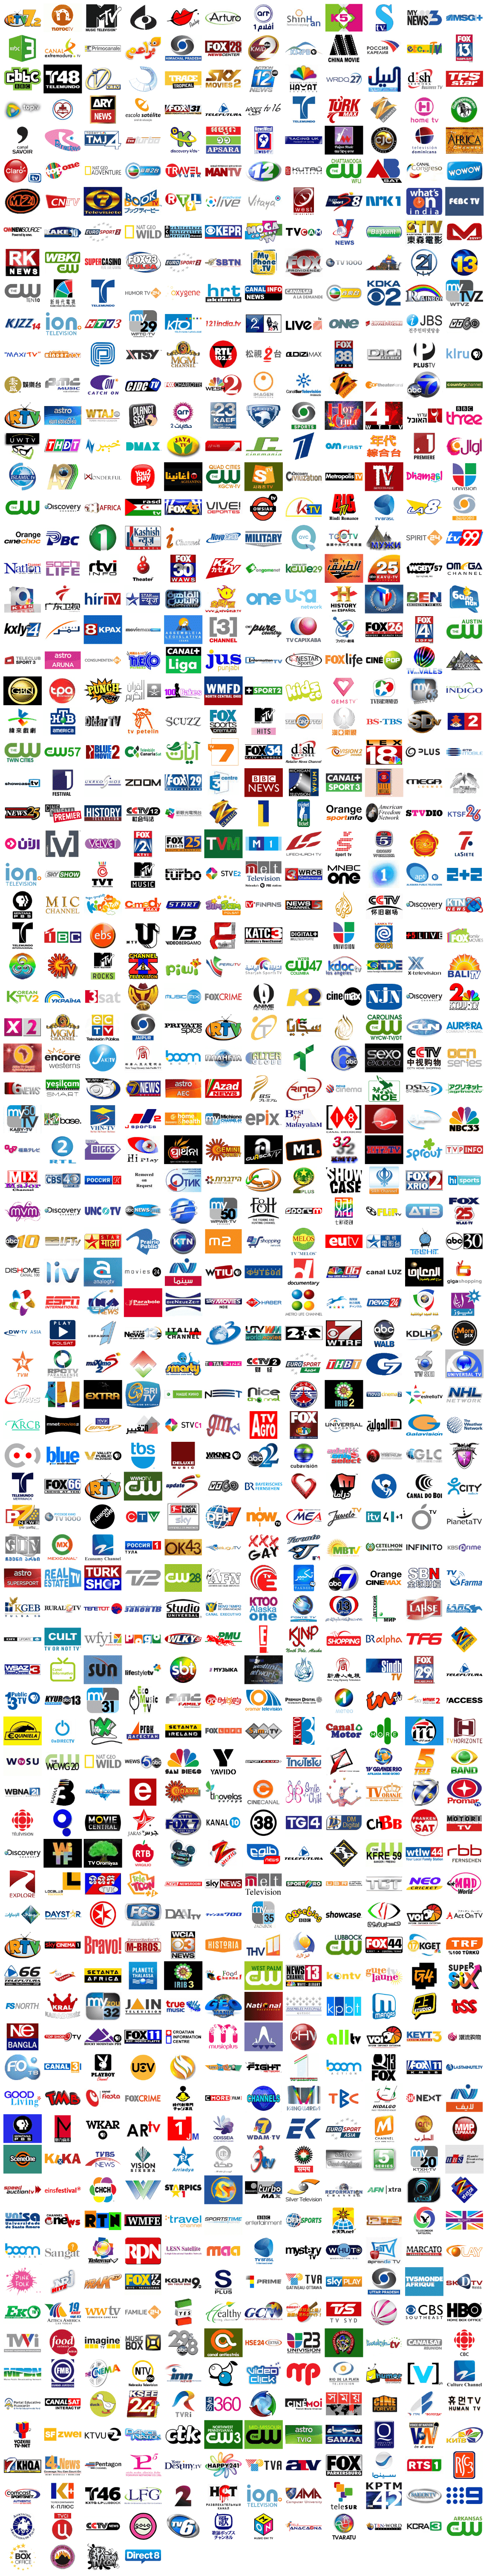 All TV Channels Logo - TV Channel Logos ( Of 7) CableTV Blog. Design Able